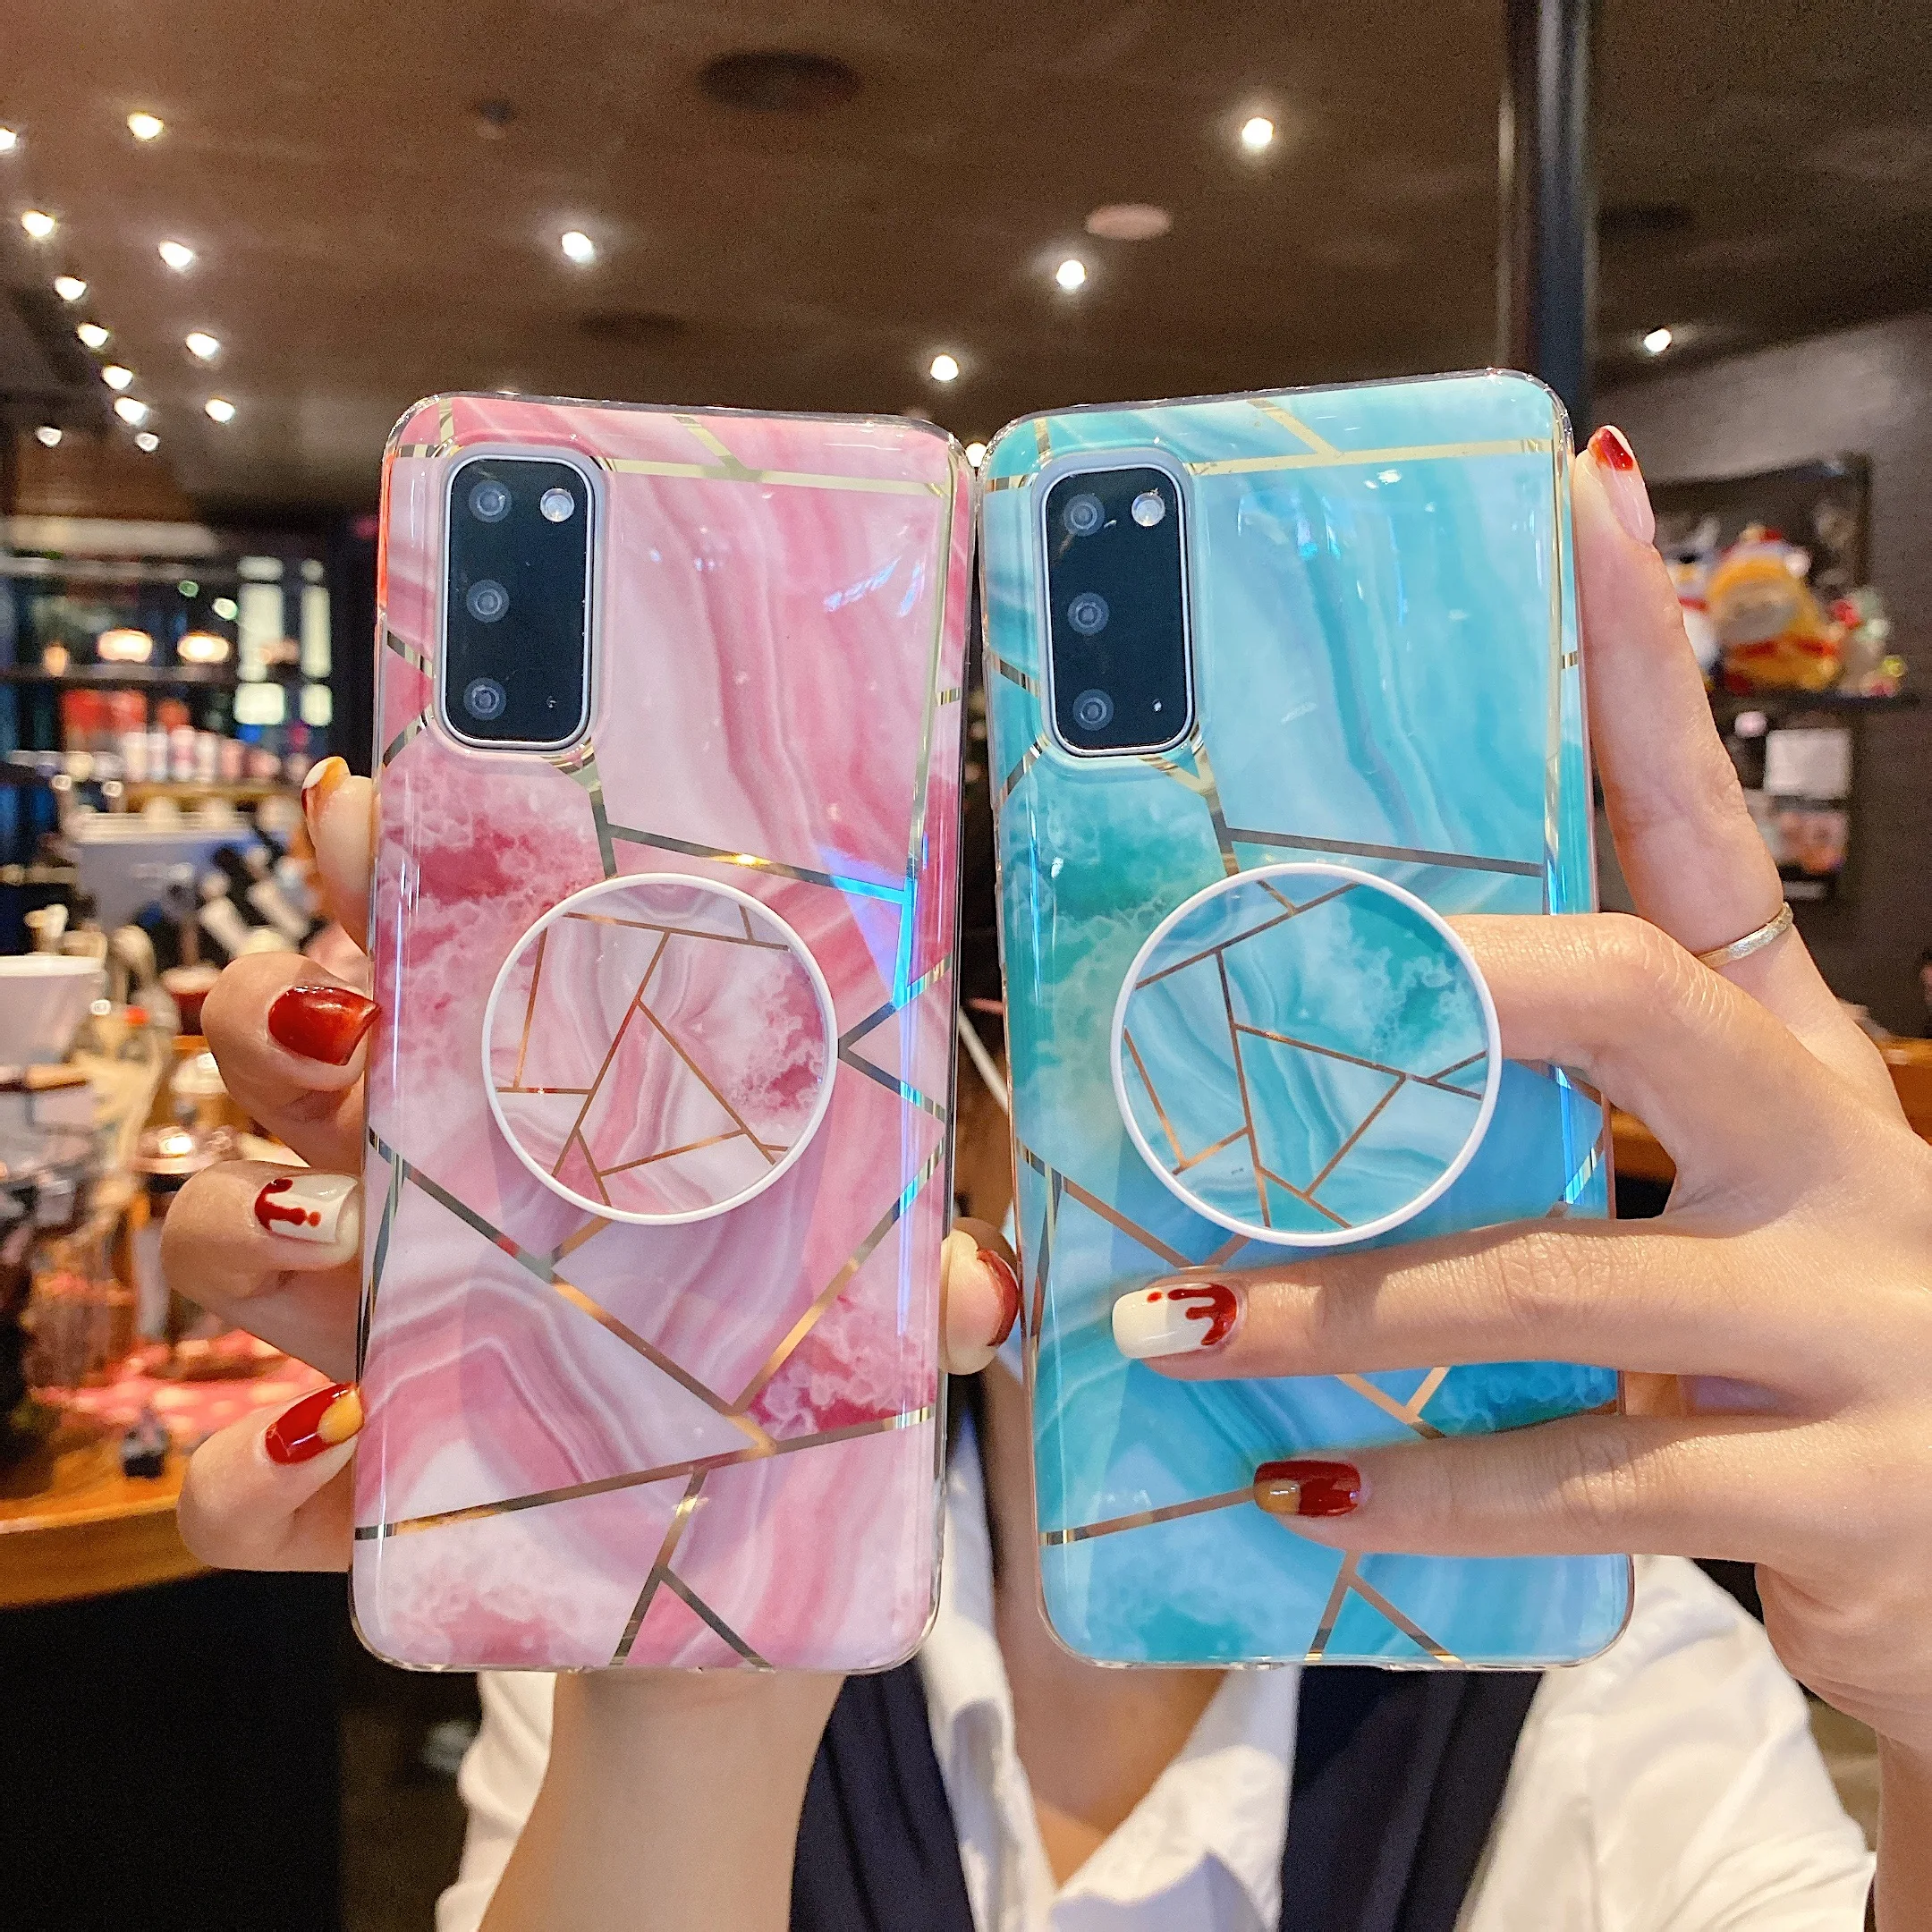 

Samsung A10 M10 A20 A30 A50 A50s A30s A70 A31 A41 A51 A71 A21s A10s A20s M51 M31s A12 A42 Marble Phone Case Cover With Holder